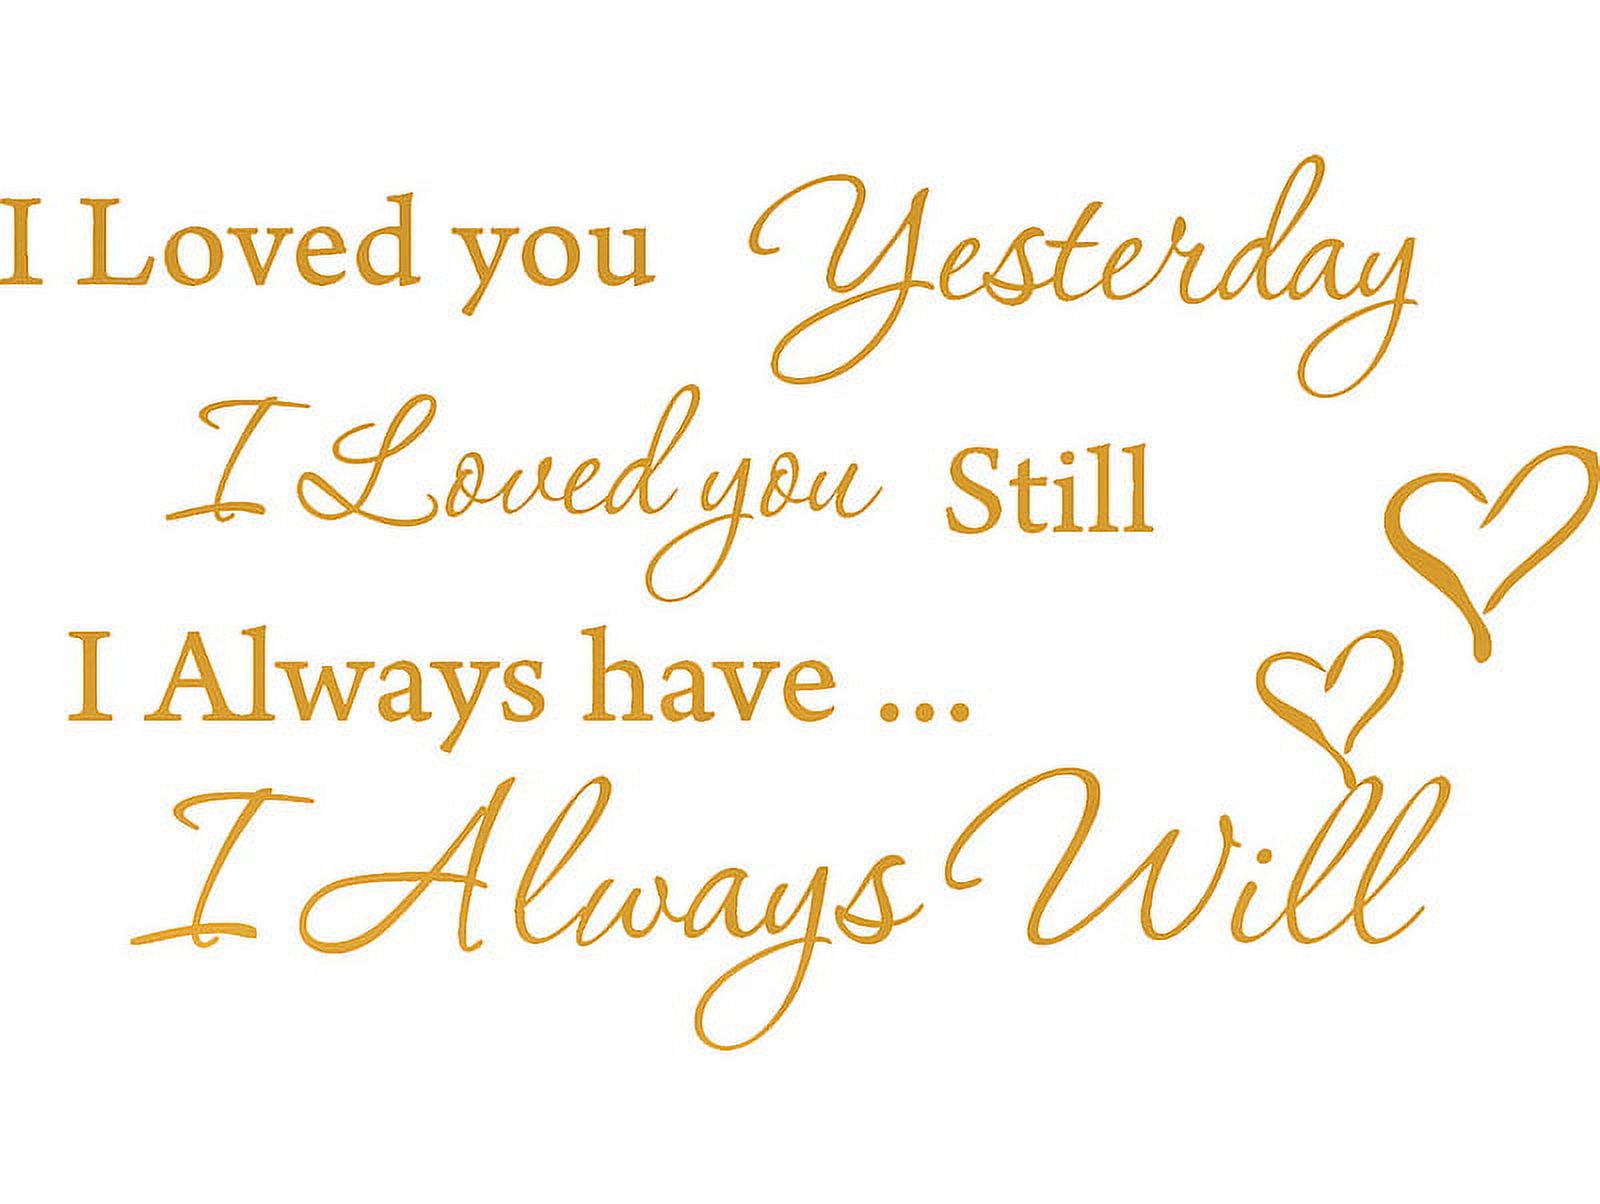 GOLD(CHROME MIRROR) 27" x 15" I Loved you Yesterday I love you still Vinyl wall art Inspirational quotes and saying home decor decal sticker - image 1 of 1